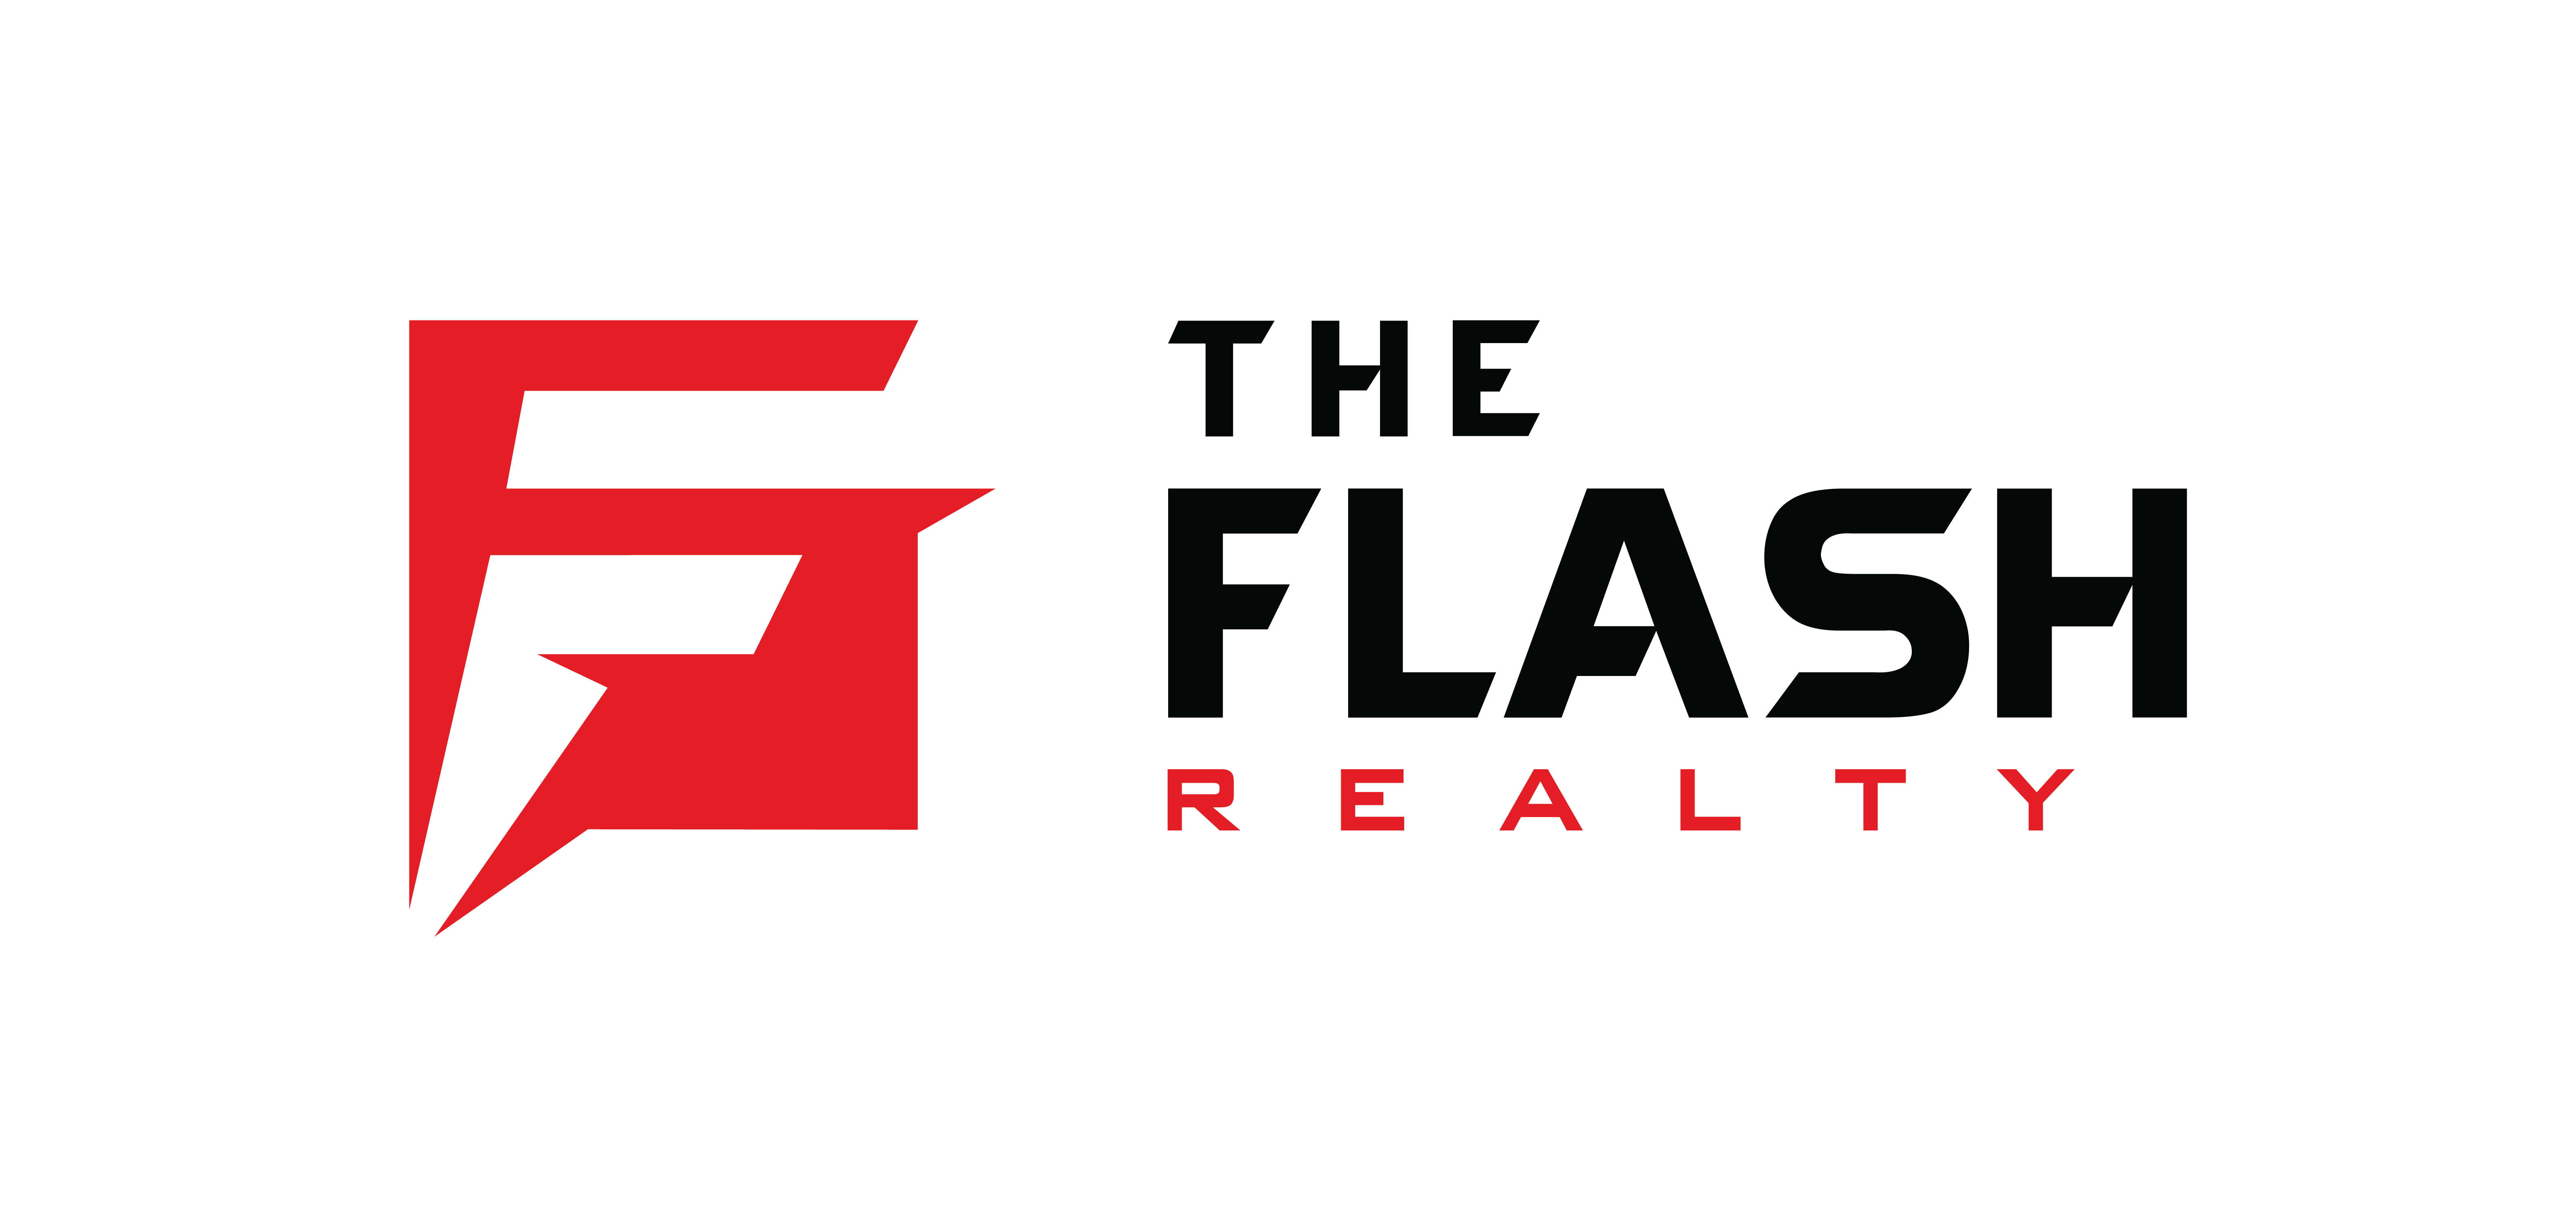 Flash Realty